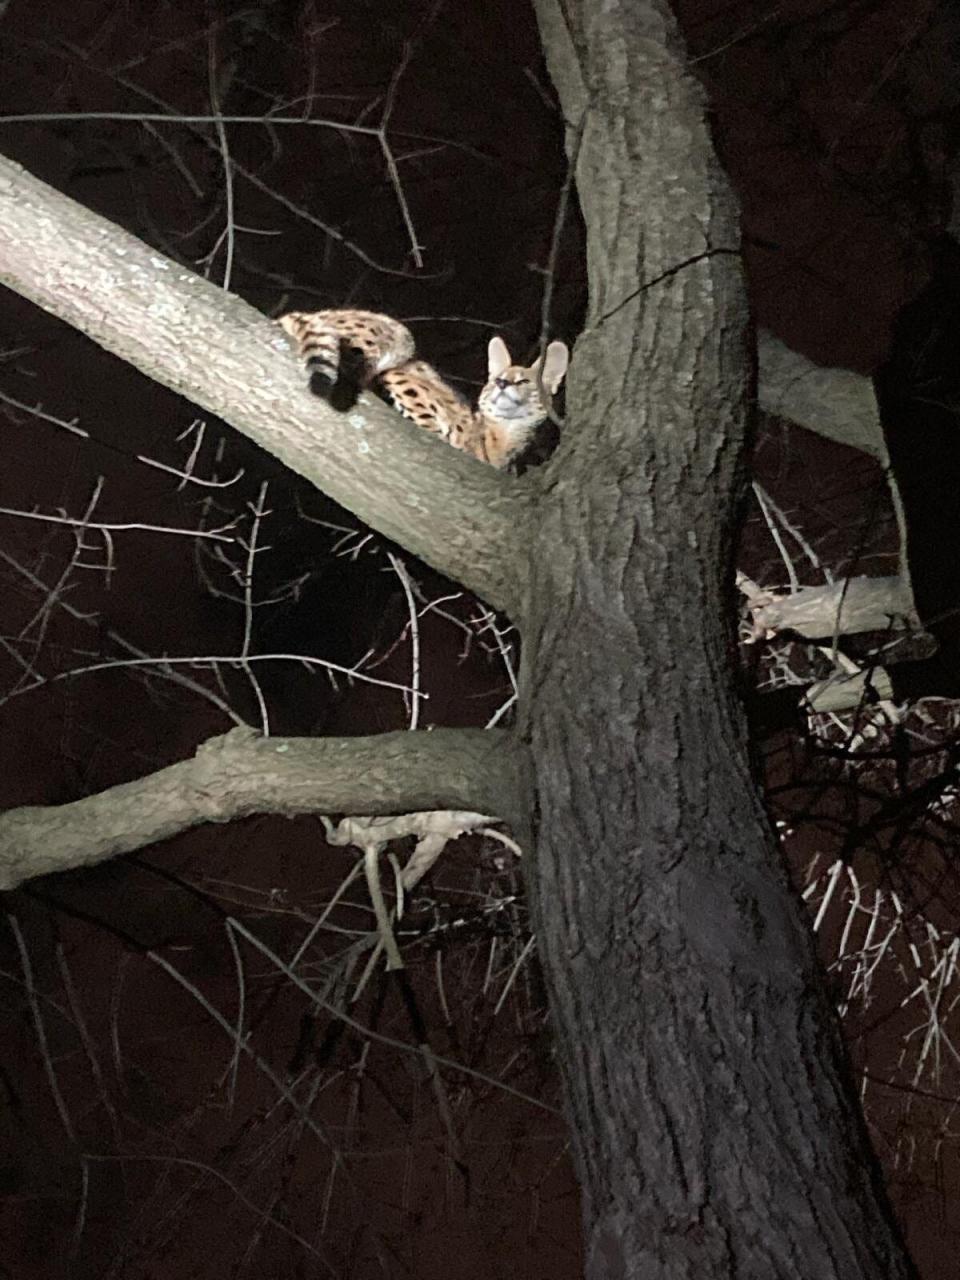 An exotic cat that climbed a tree after being discovered by police during a traffic stop was recovering at the Cincinnati Zoo & Botanical Garden on March 9, 2023 after city animal control officials said it tested positive for cocaine.